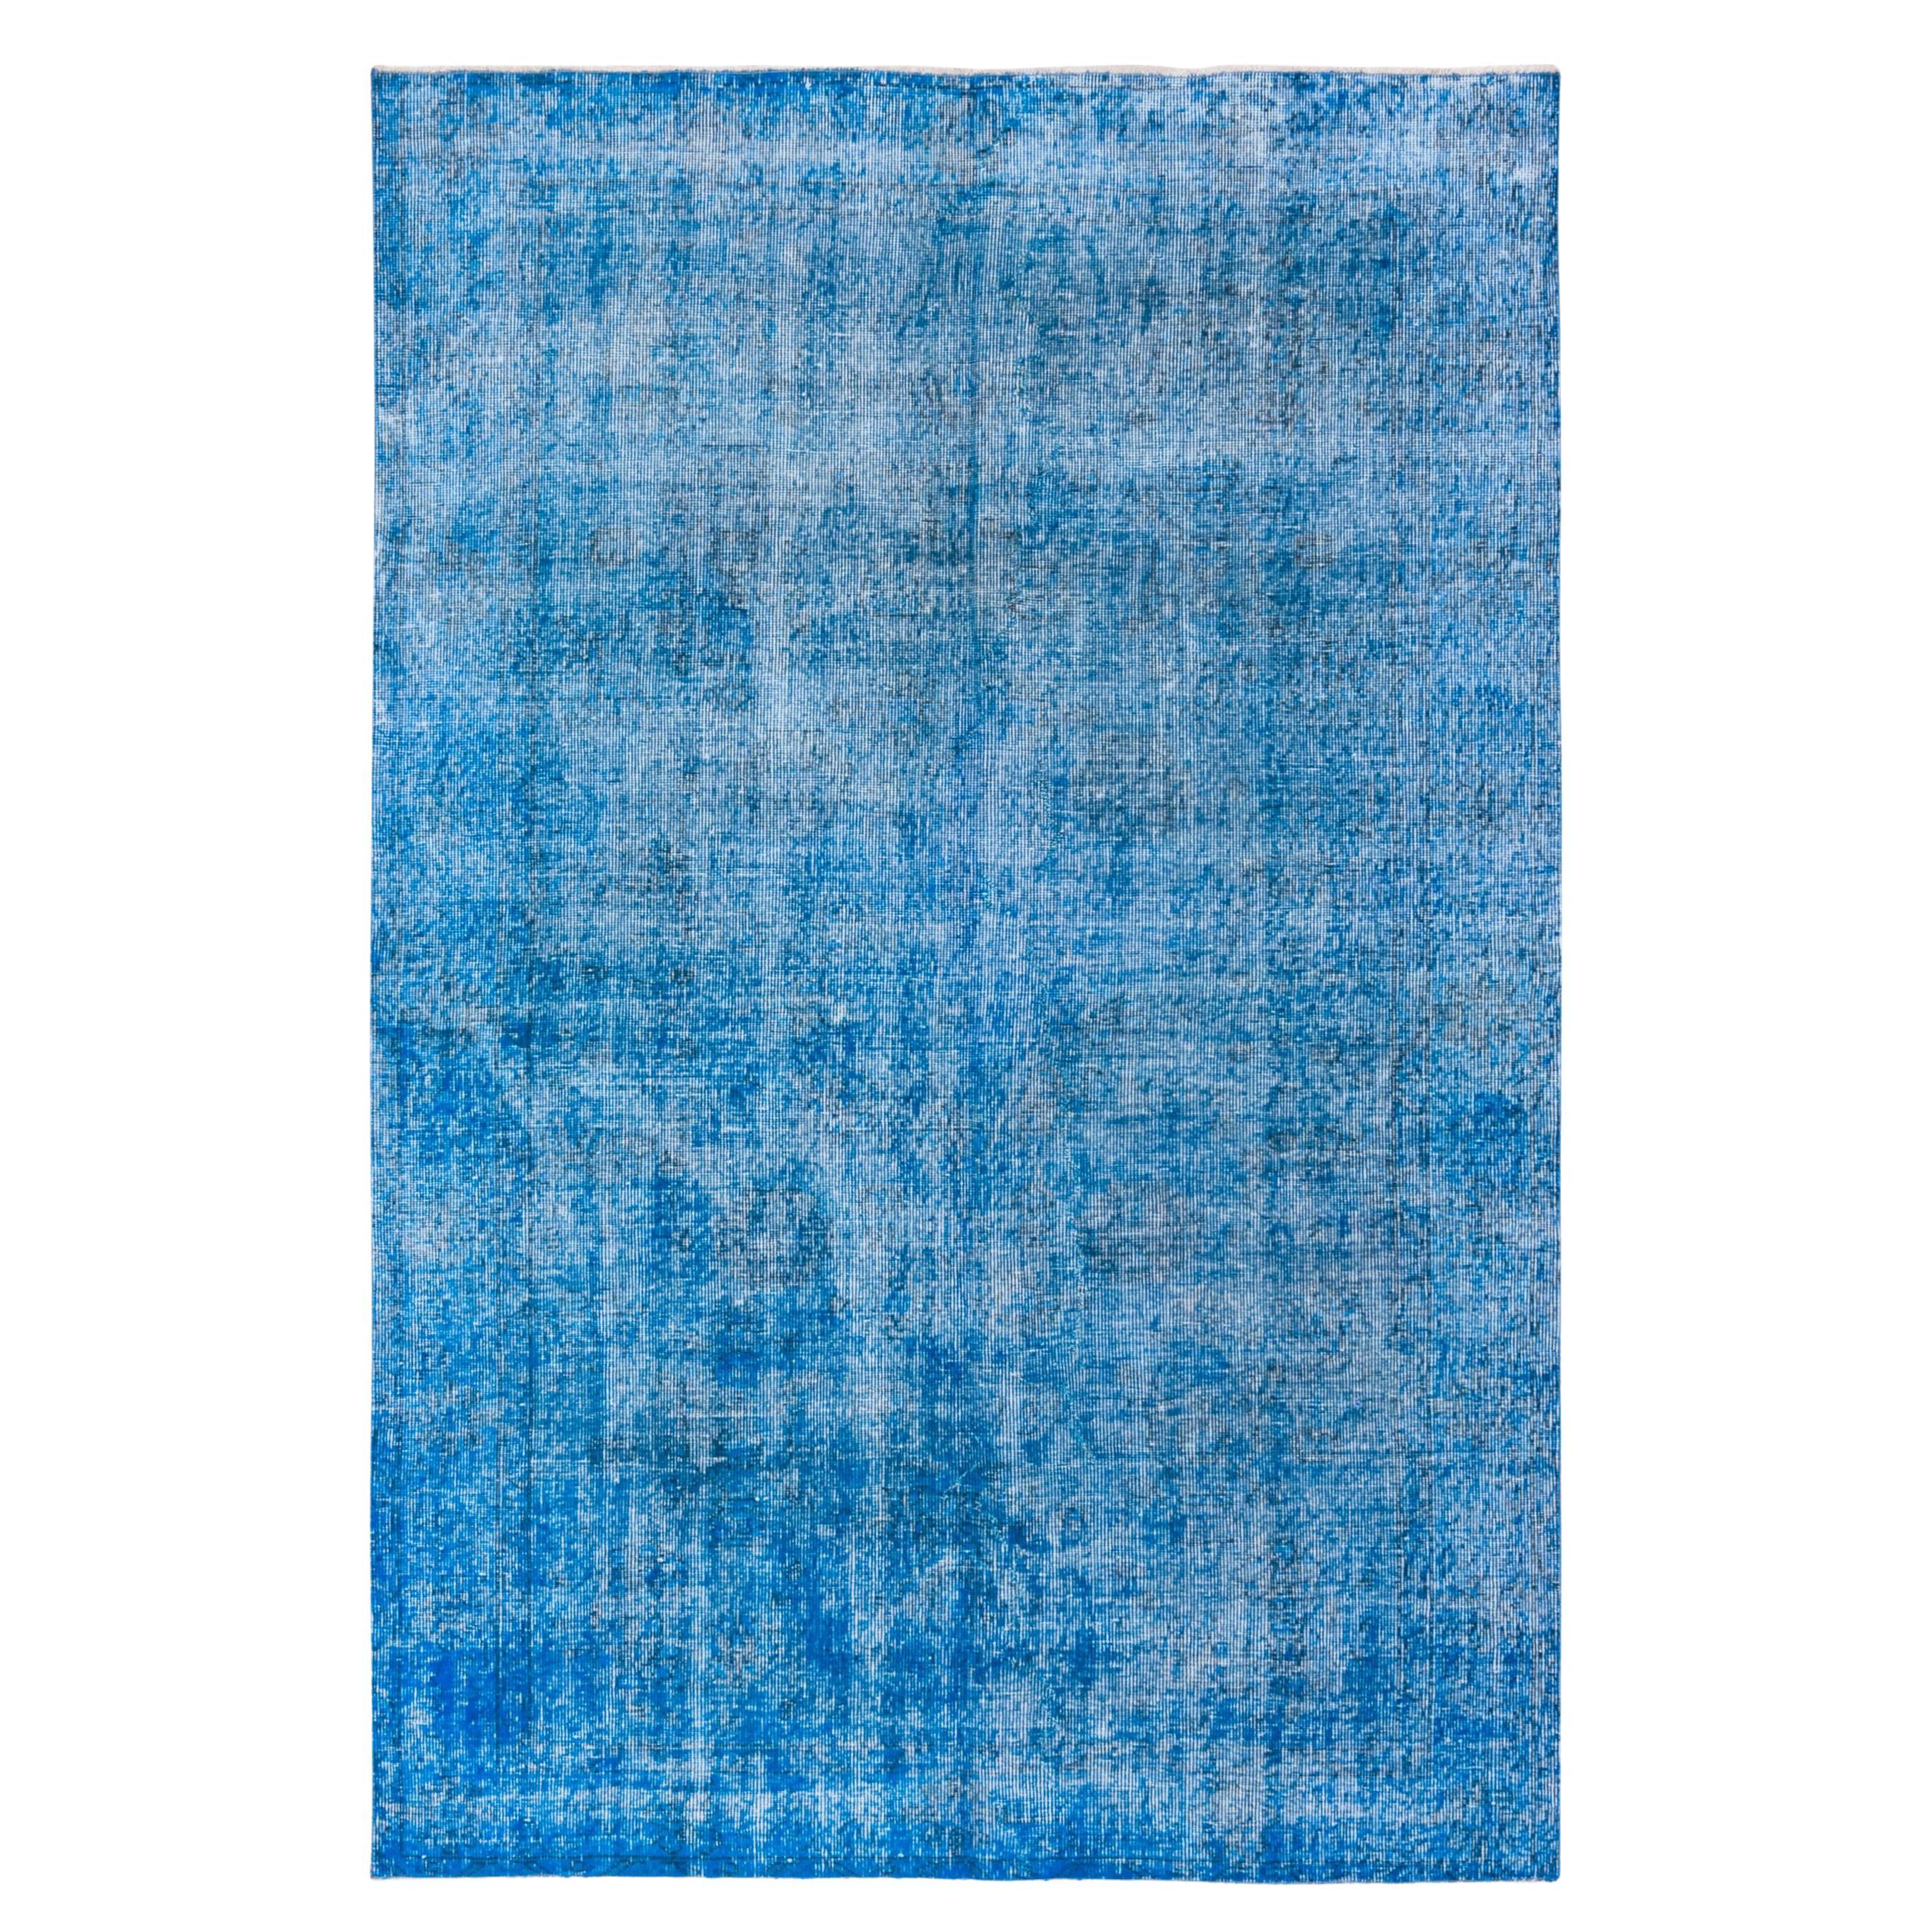 Vintage Overdyed Blue Rug, Shabby Chic, Bright Colored